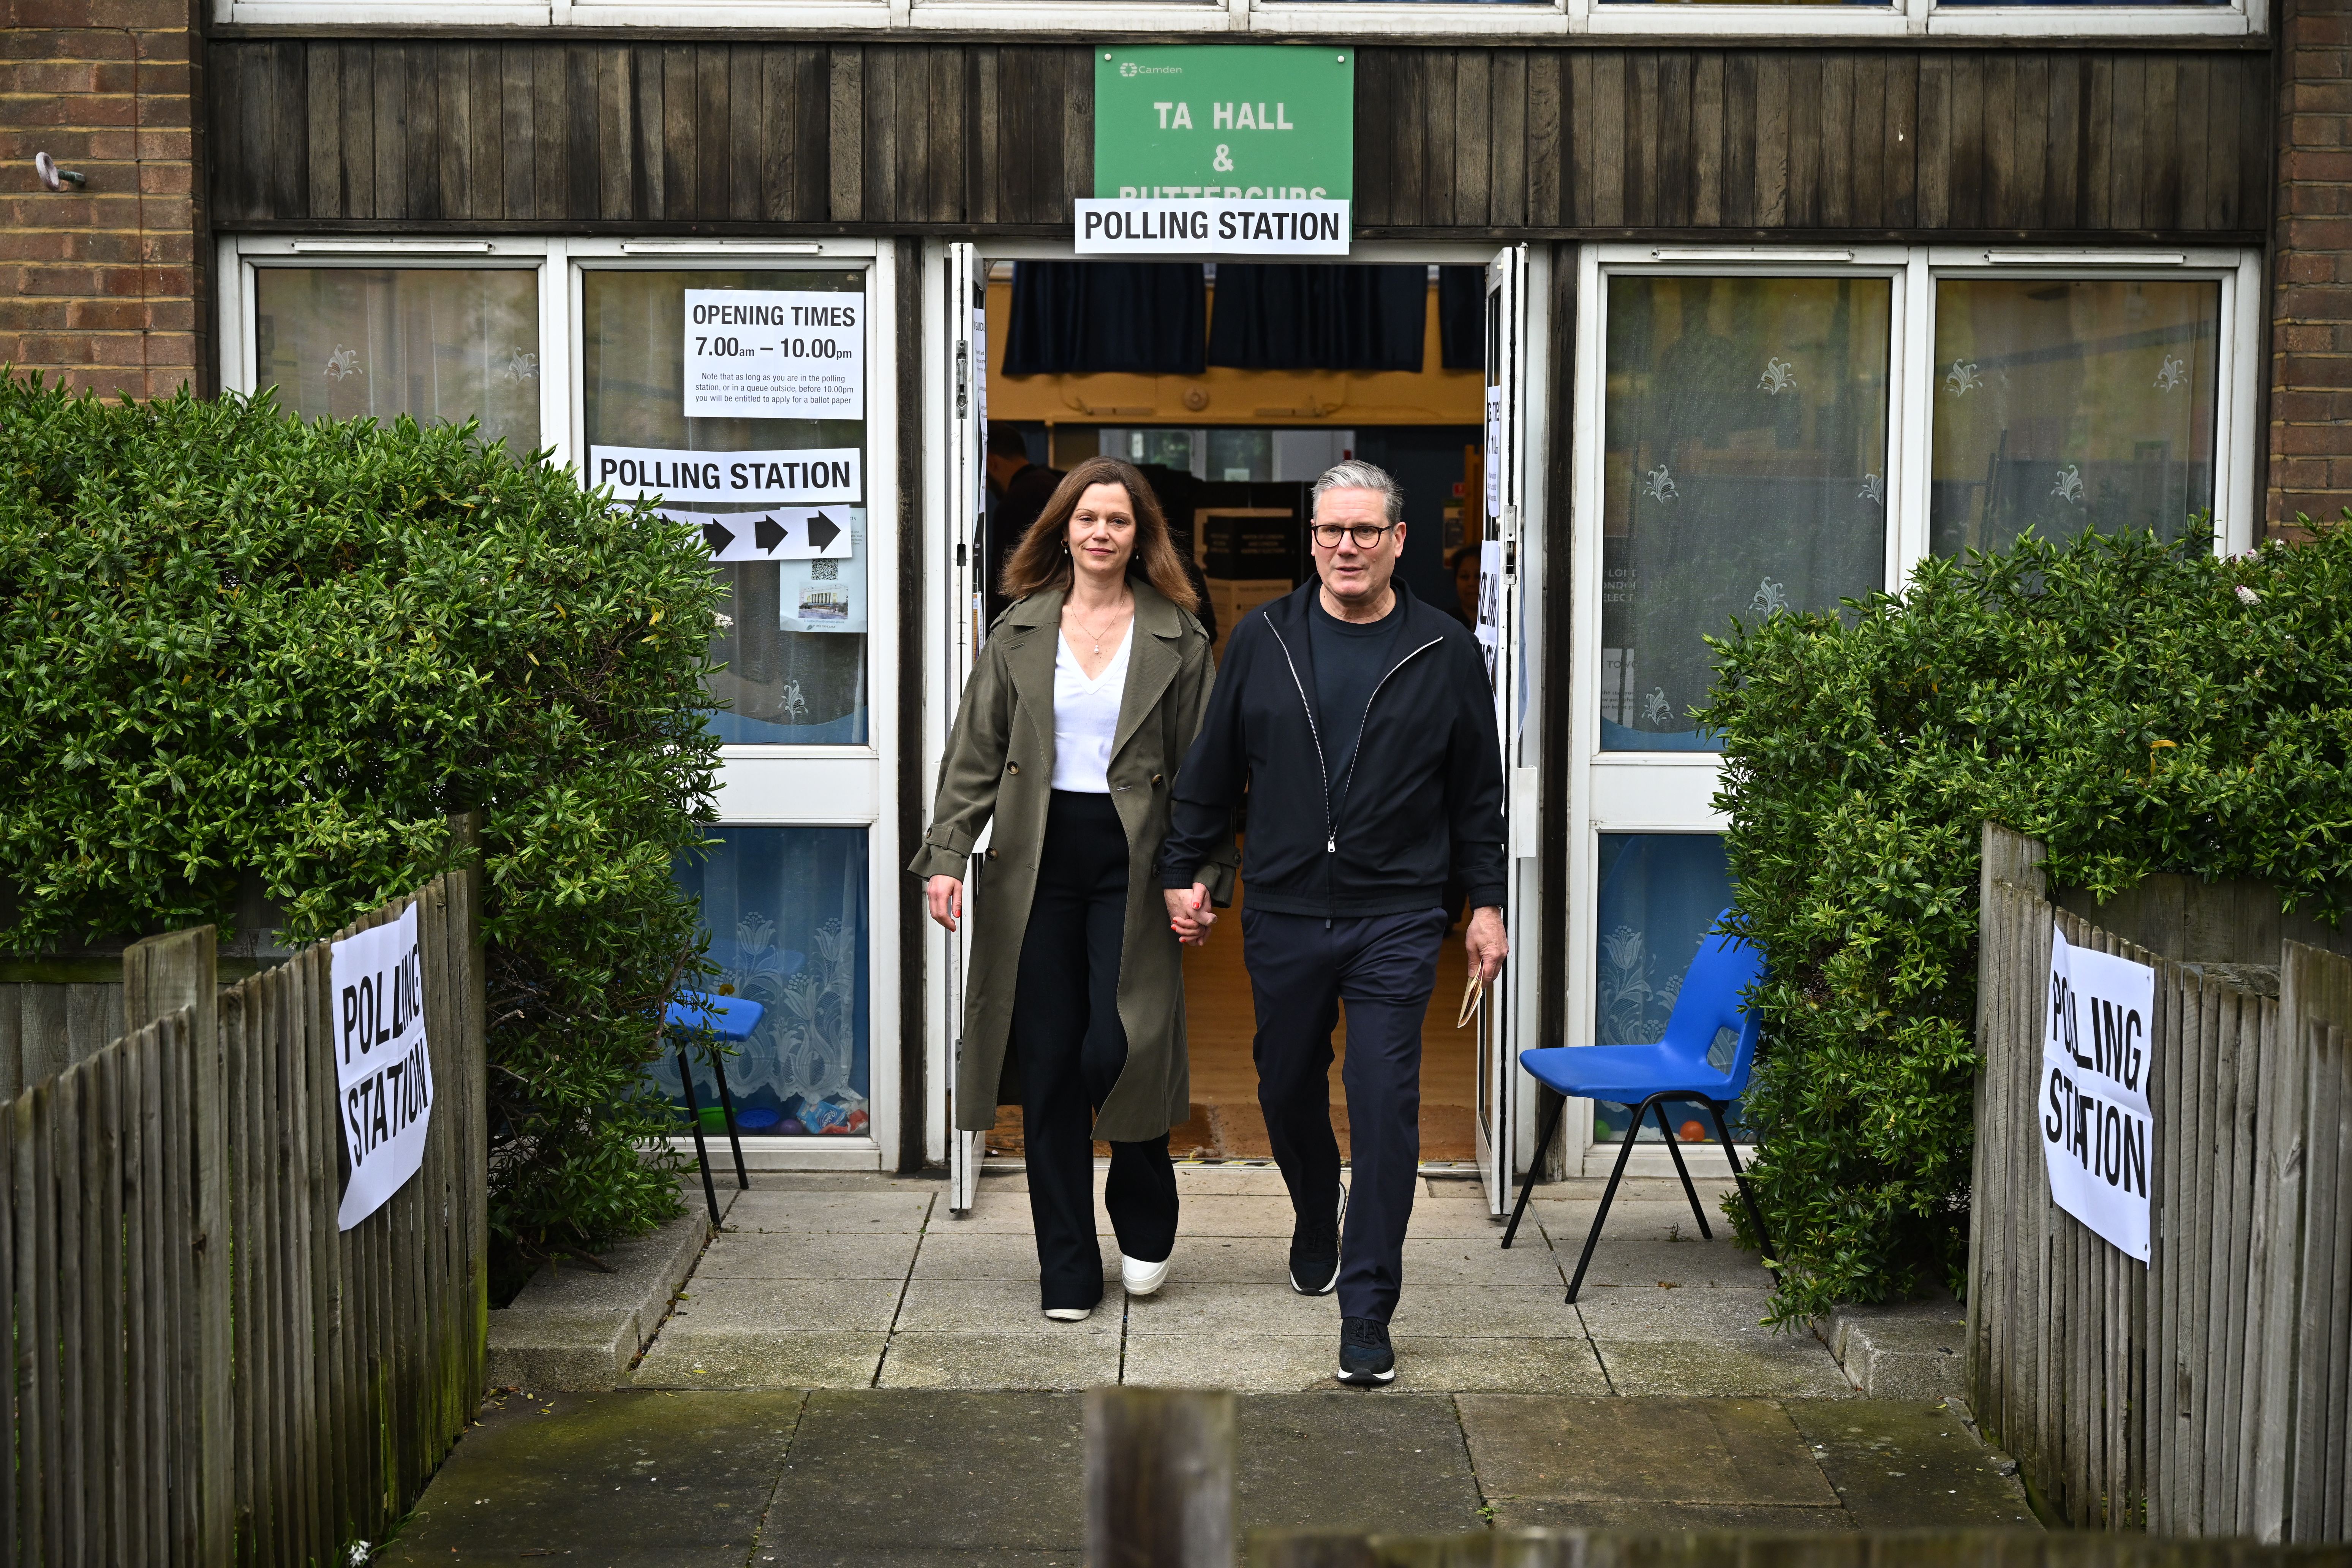 Labour leader Sir Keir Starmer and wife Victoria were all smiles after they voted this morning